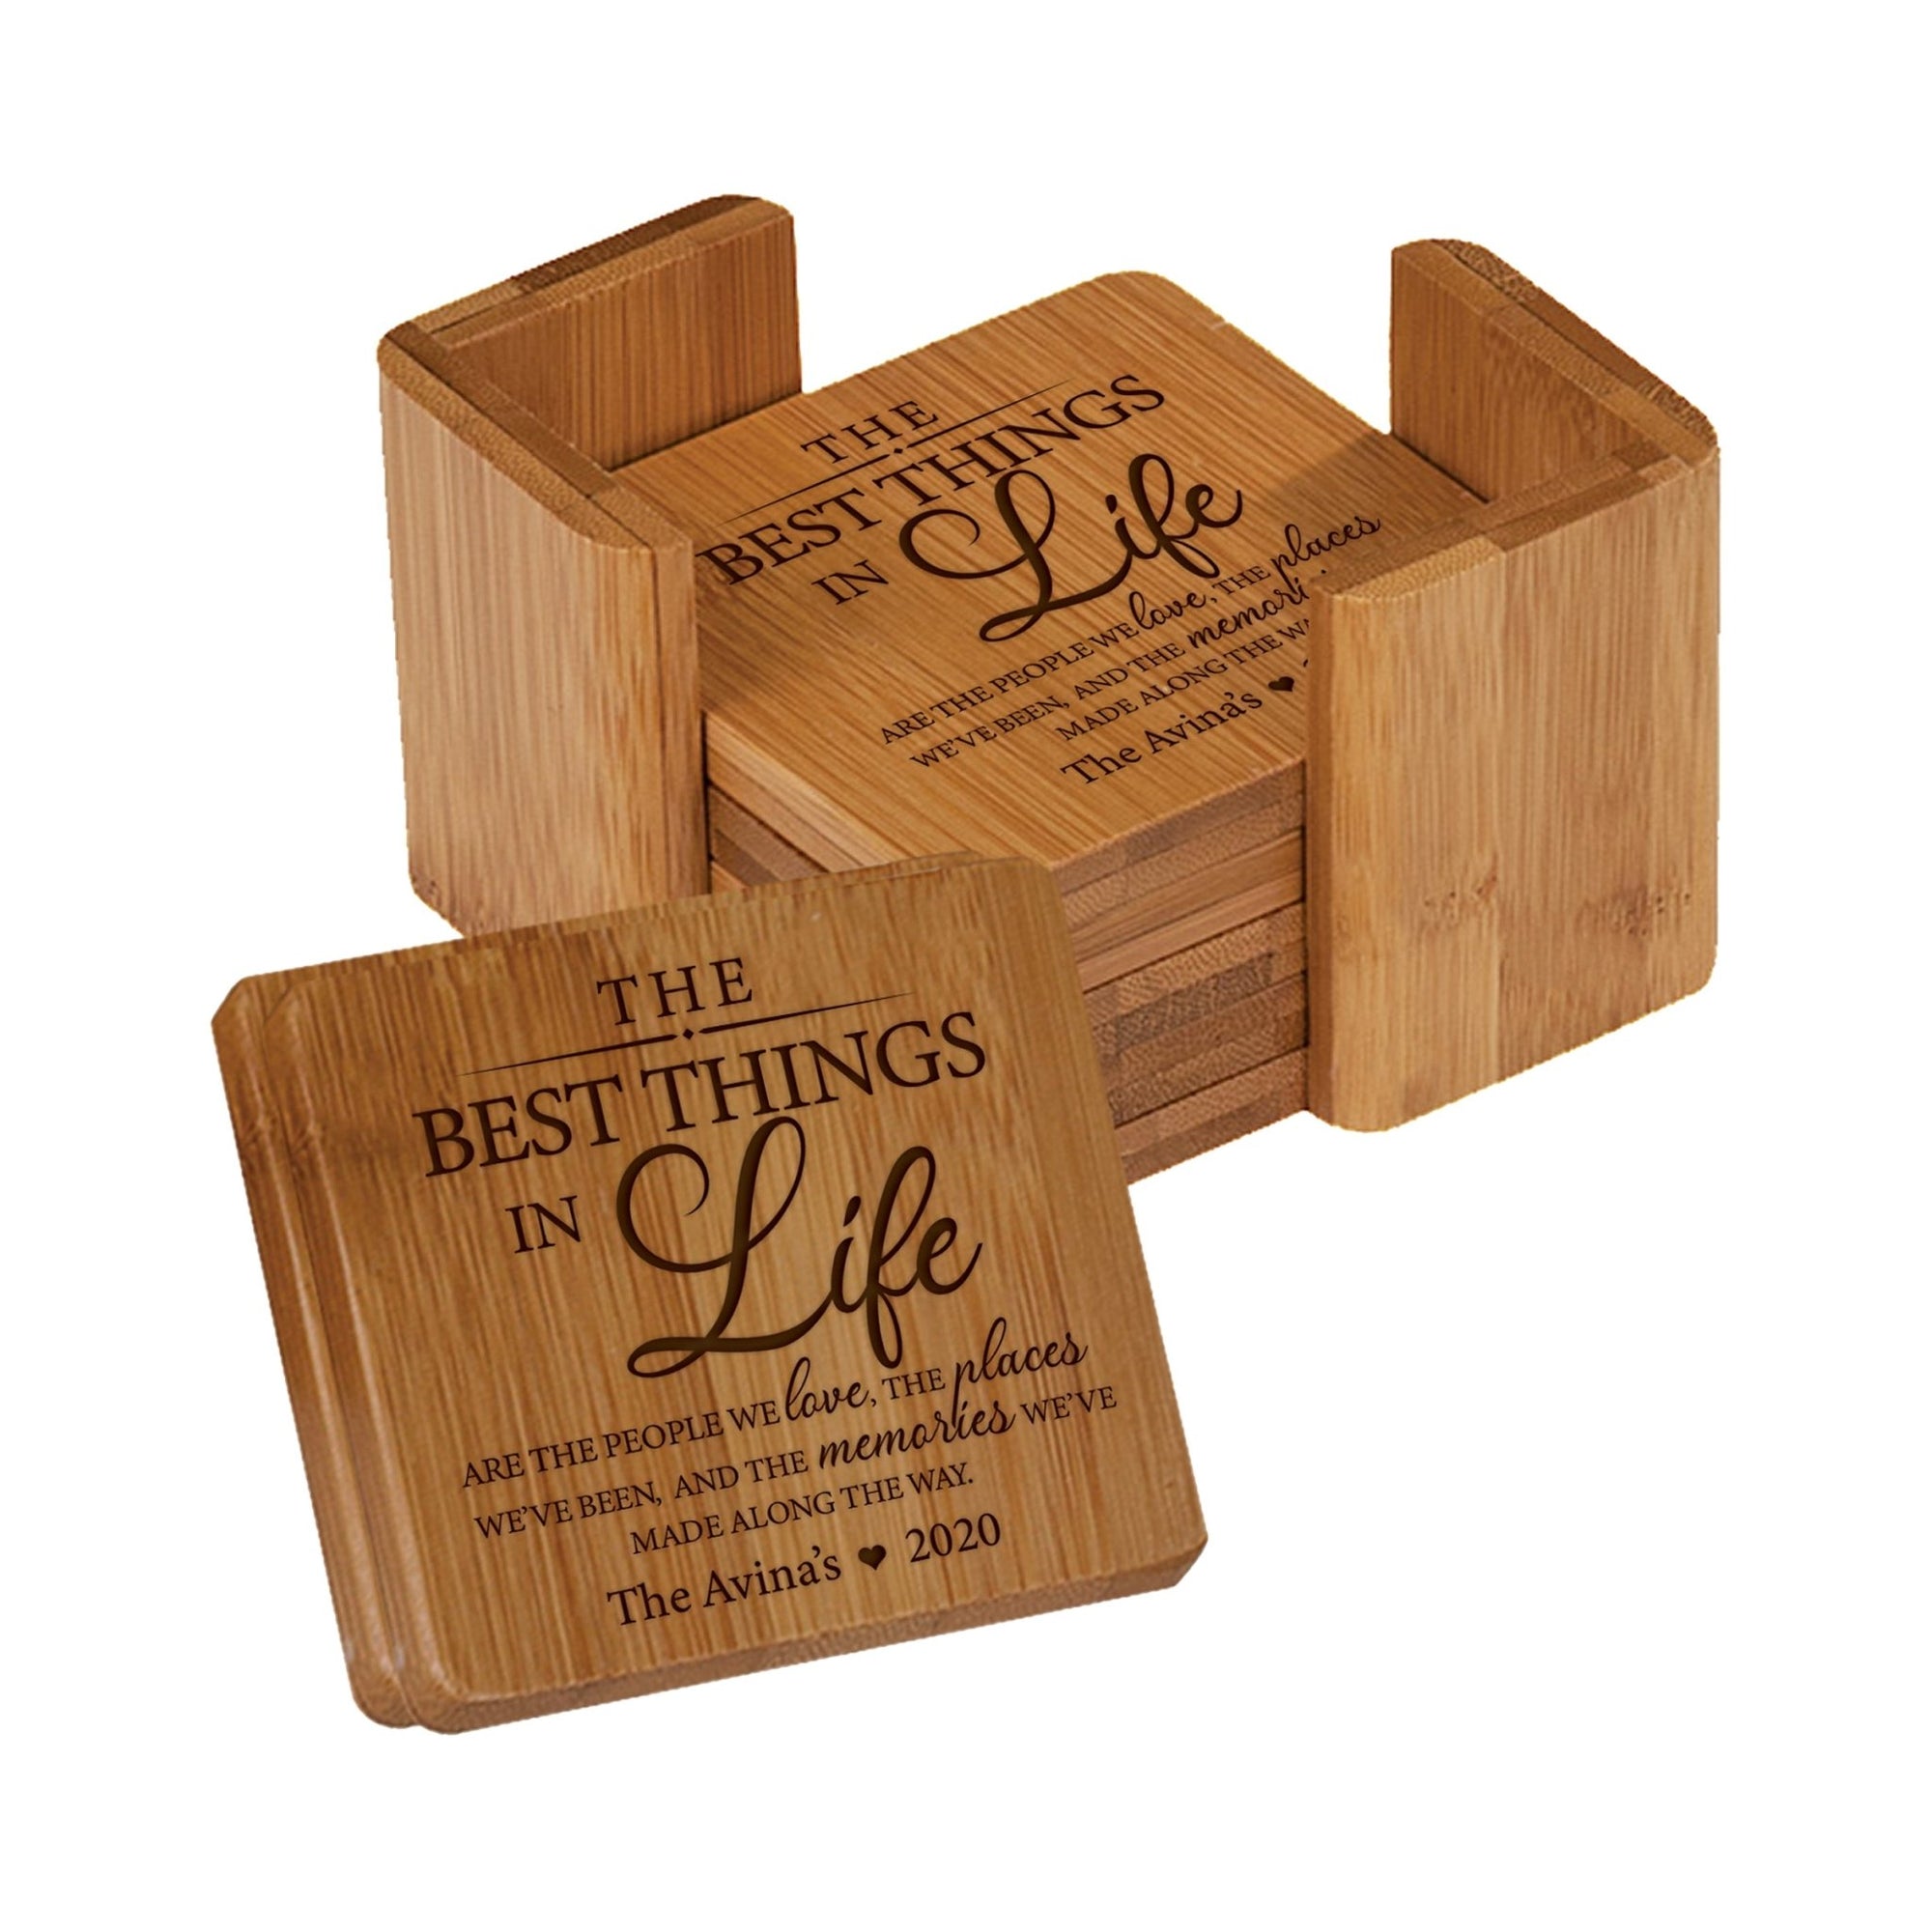 Personalized Family Home 6pc Solid Bamboo Coaster Set With Holder 4.5x4.5 – The Best Things - LifeSong Milestones